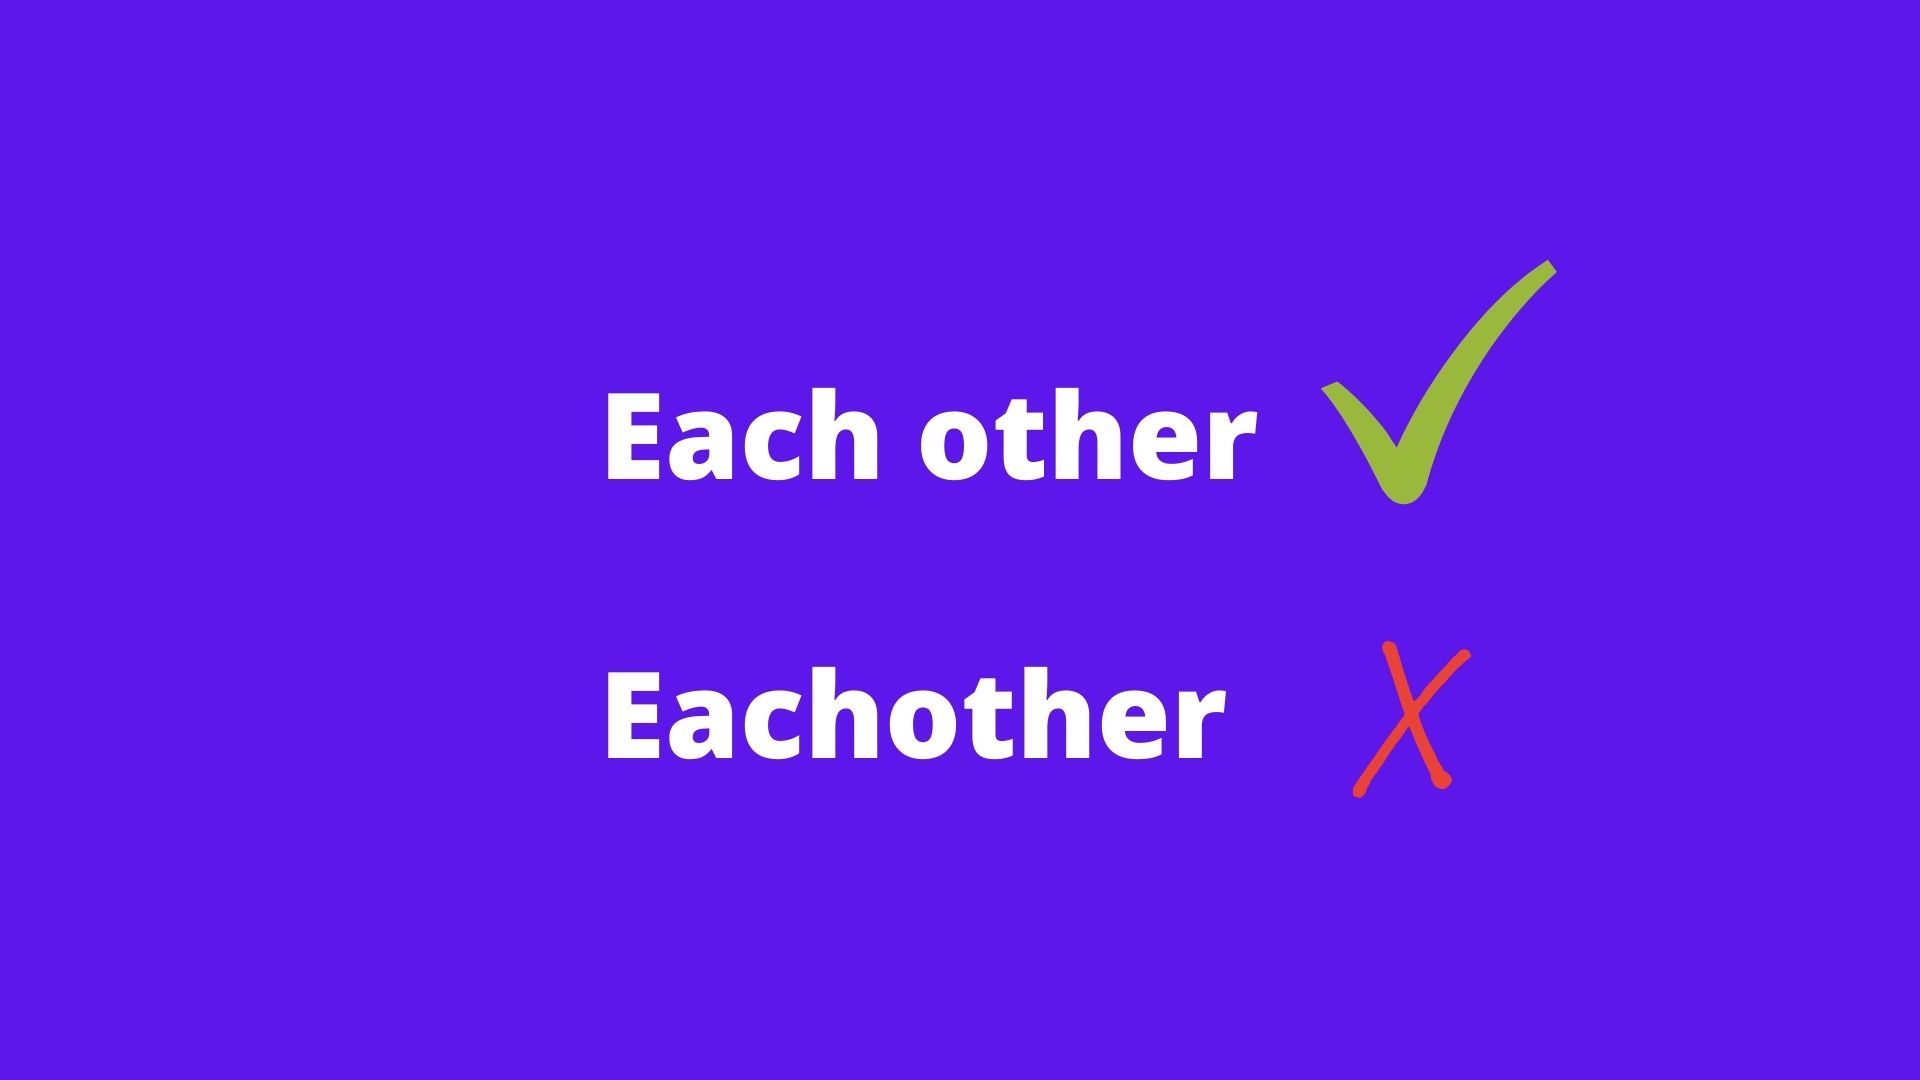 Graphic explaining the difference between each other and eachother, stating that eachother is incorrect.